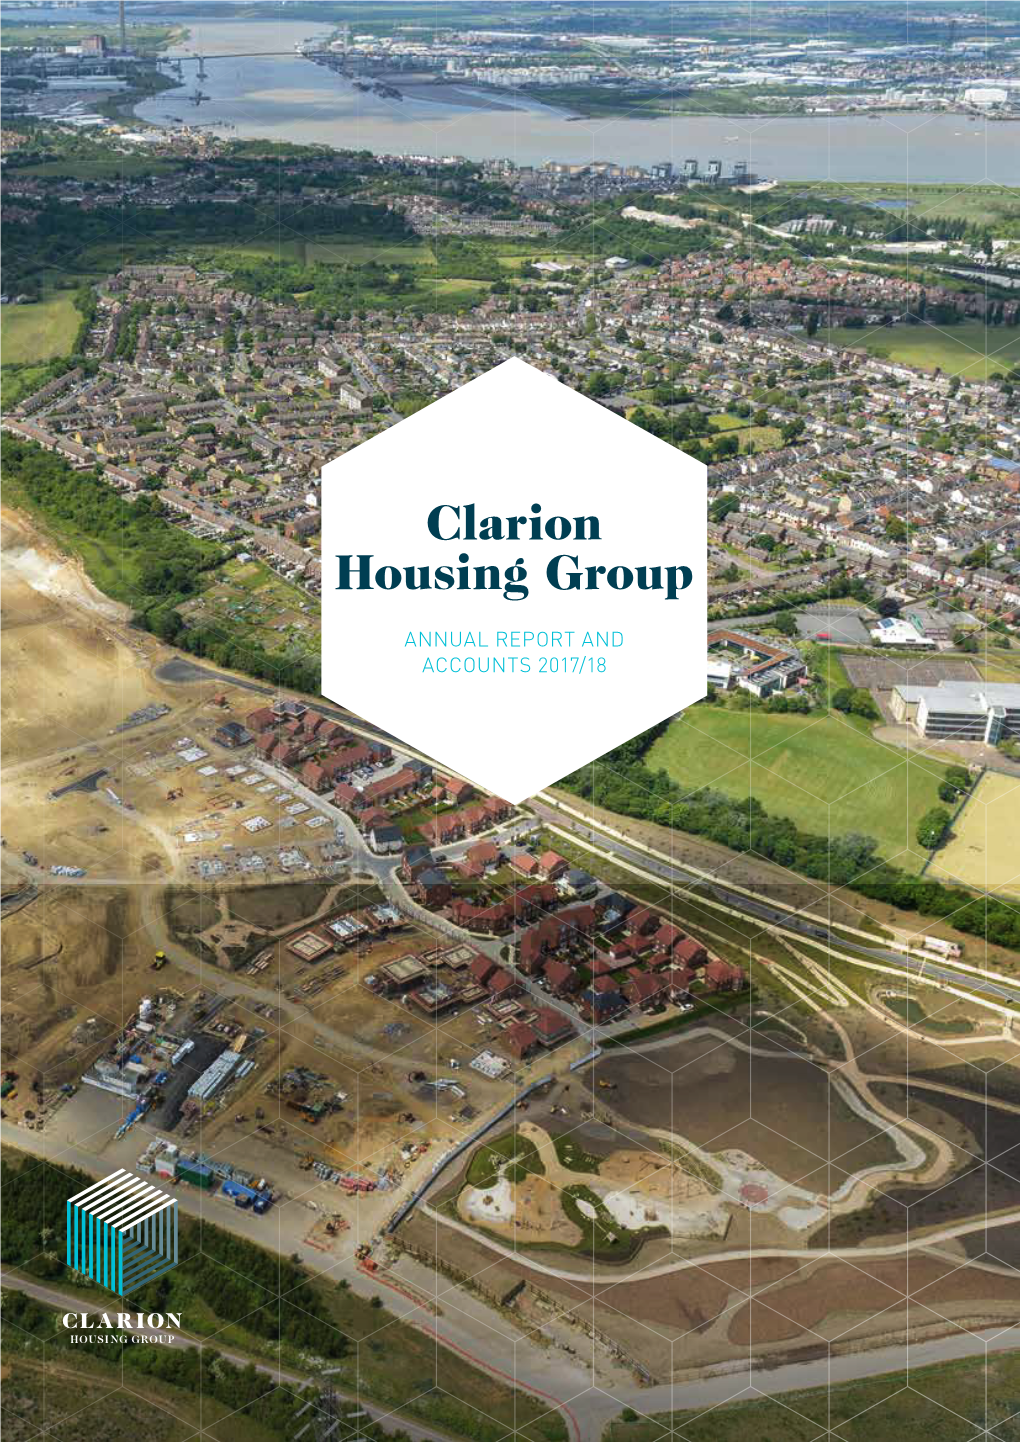 CLARION HOUSING GROUP ANNUAL REPORT and ACCOUNTS 2017/18 1 Introduction OUR AMBITION